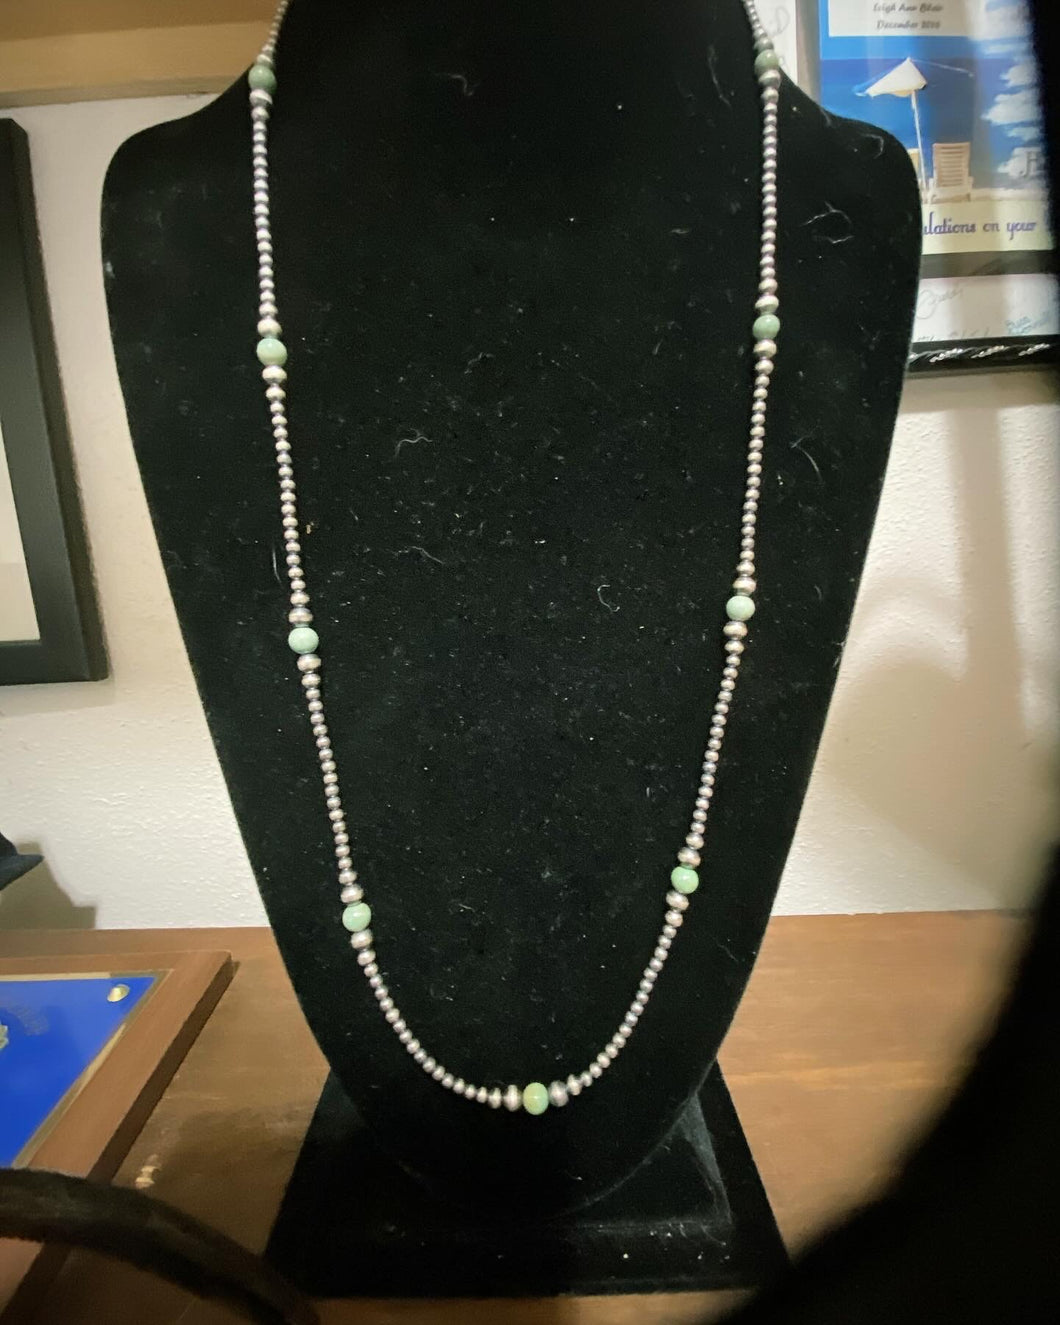 Nevada Green Turquoise and Navajo Pearls 36 inch necklace